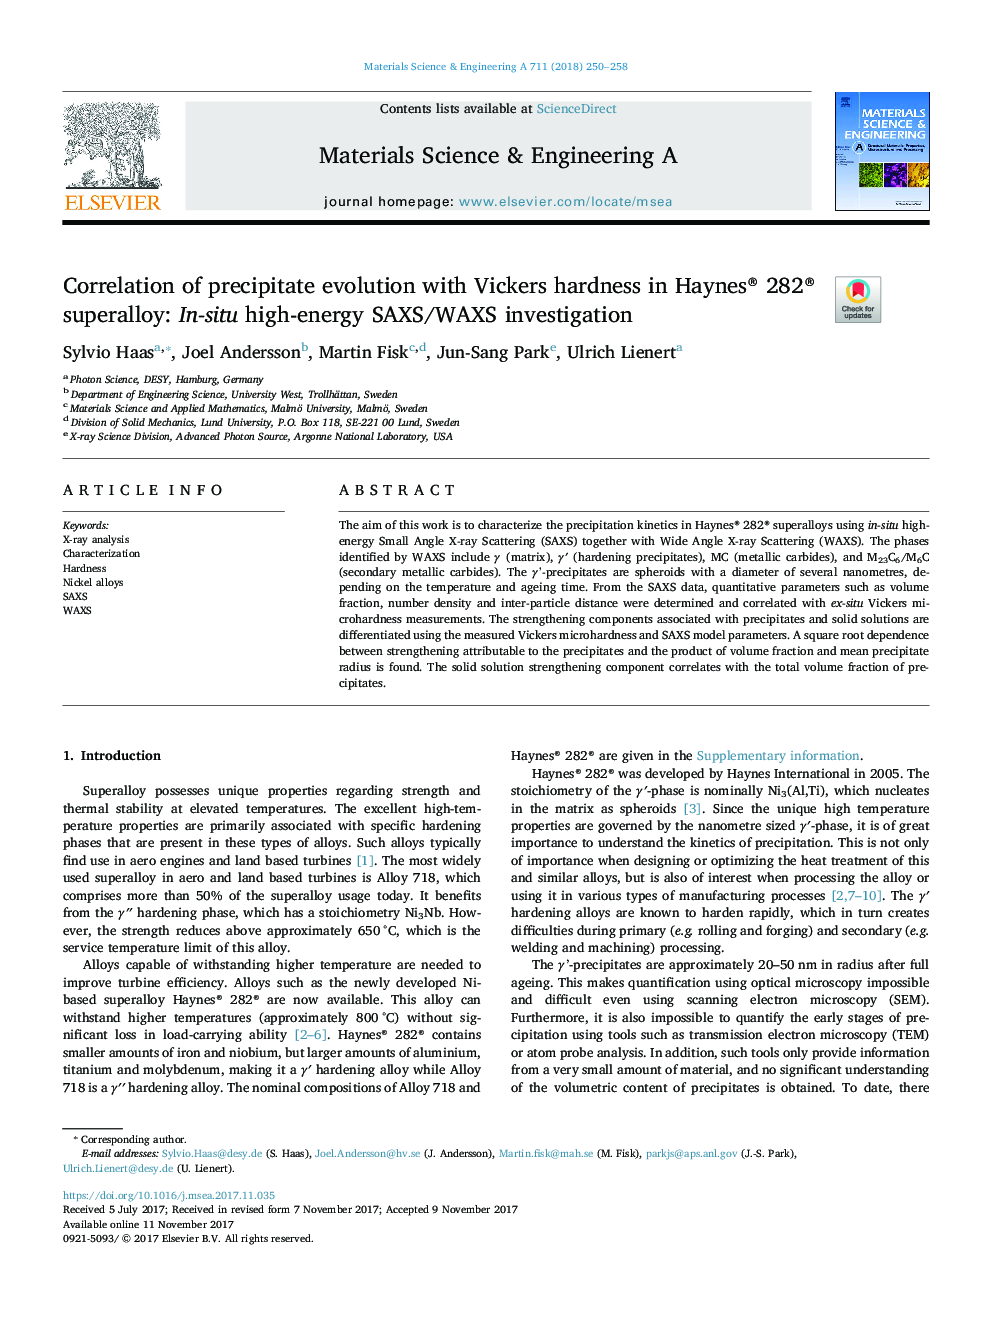 Correlation of precipitate evolution with Vickers hardness in Haynes® 282® superalloy: In-situ high-energy SAXS/WAXS investigation